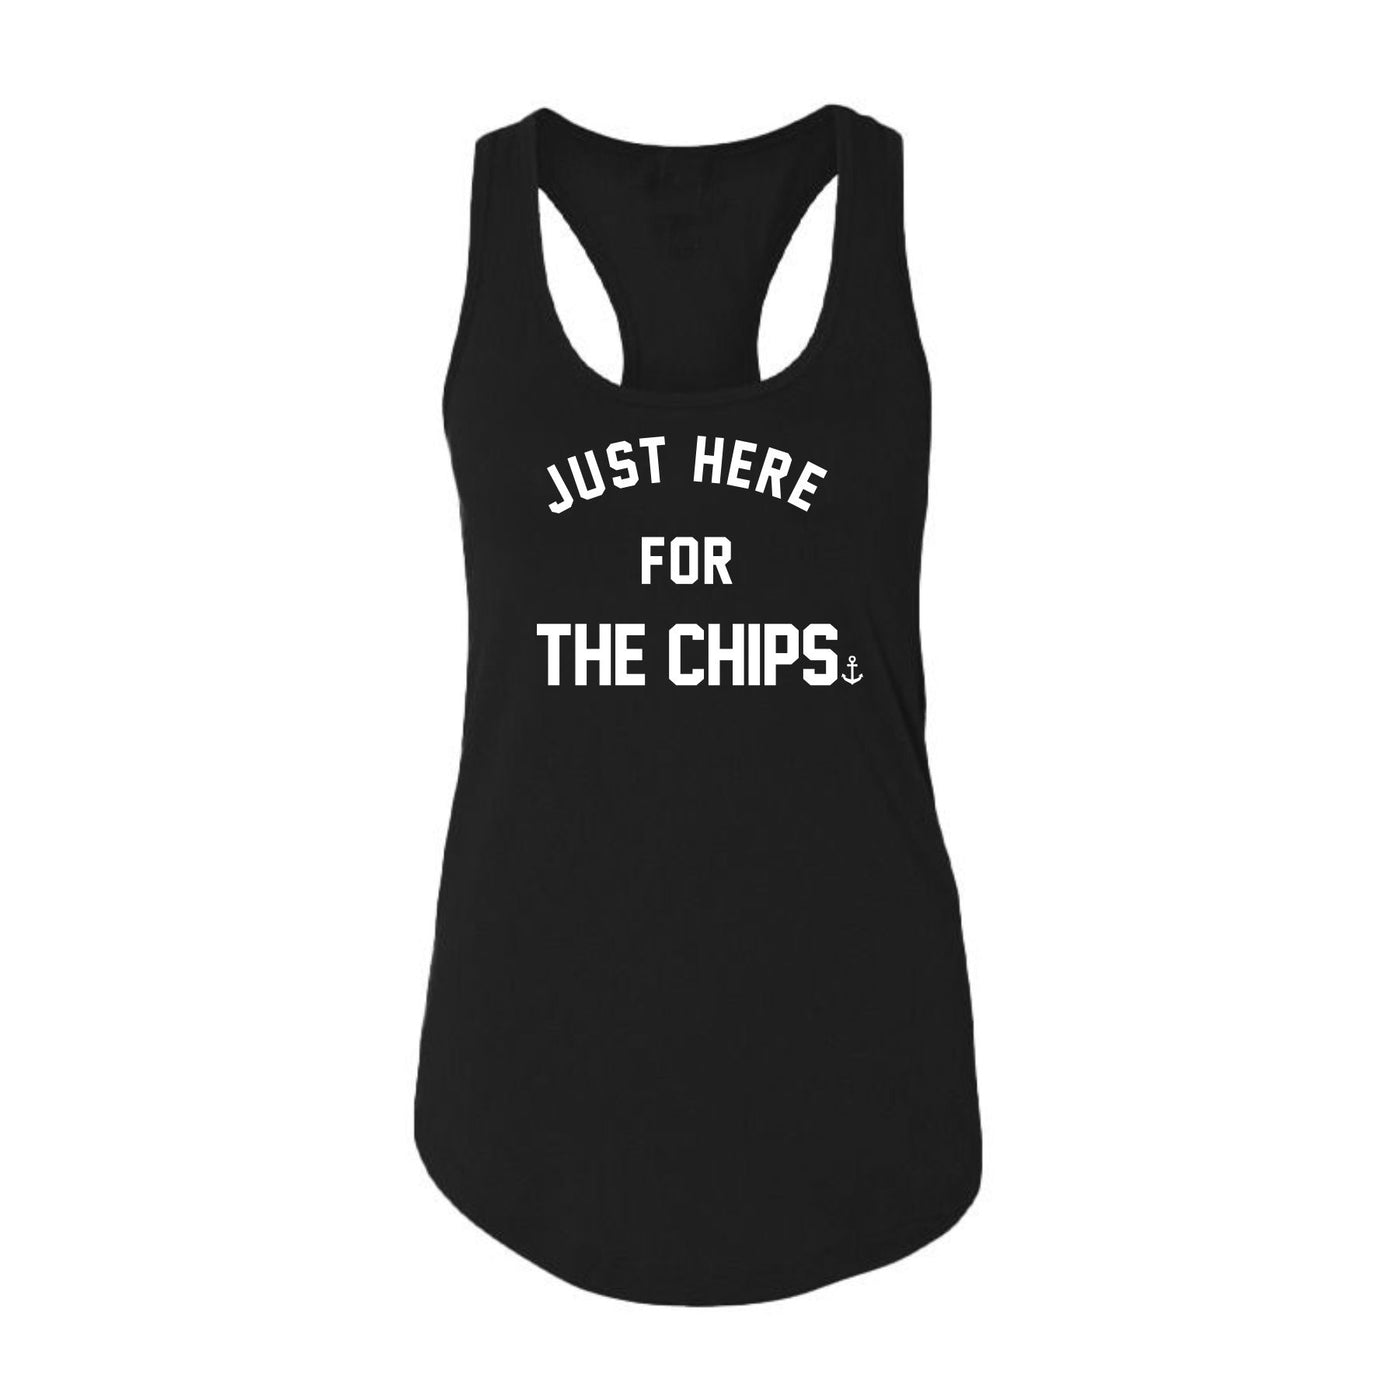 "Just Here For The Chips" Ladies' Tank Top